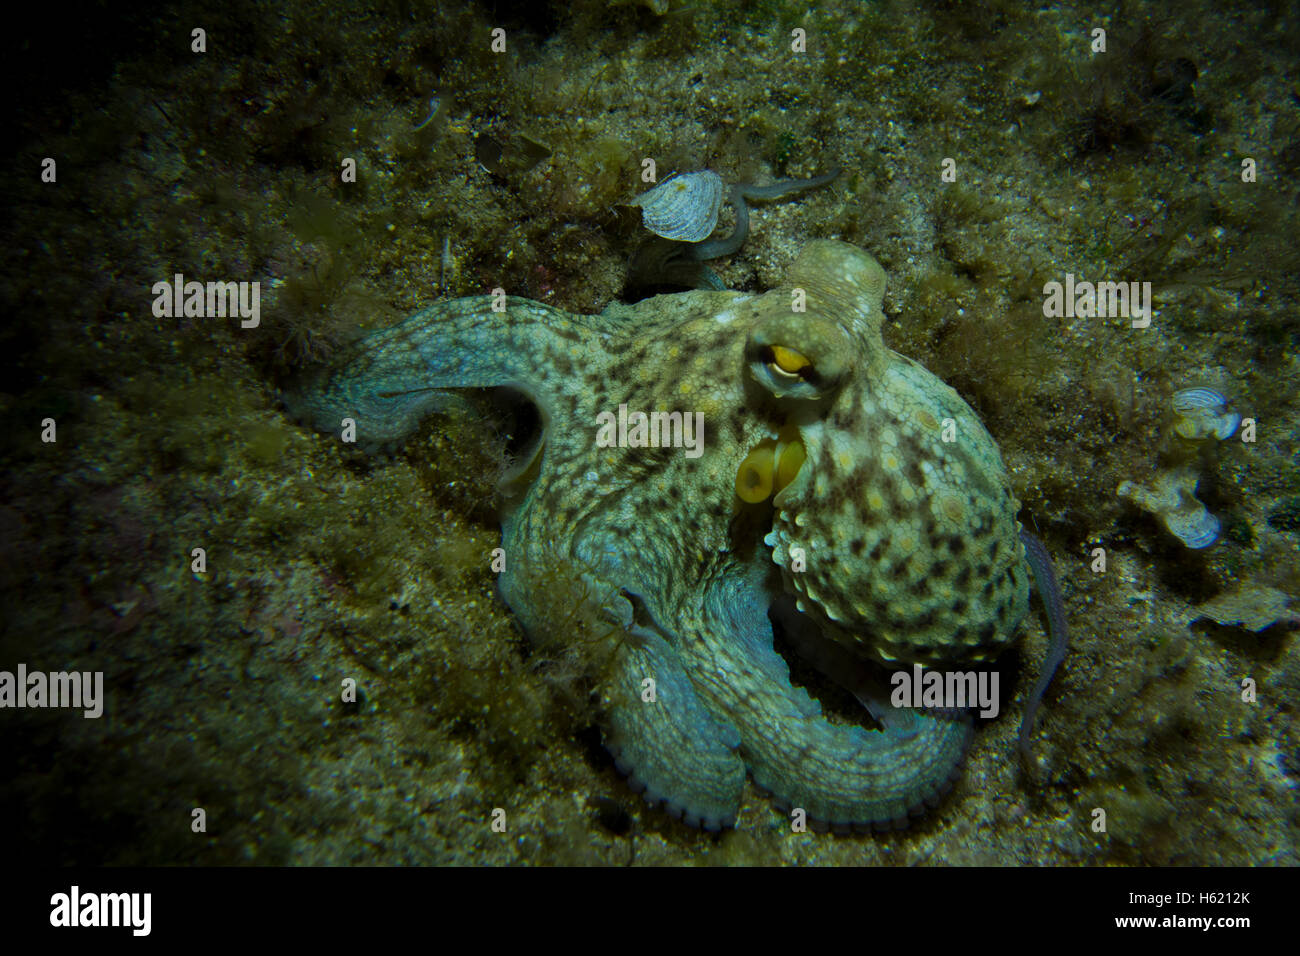 Octopus, Octopus vulgaris, close-up form the Mediterranean Sea. This picture was taken in Malta. Stock Photo